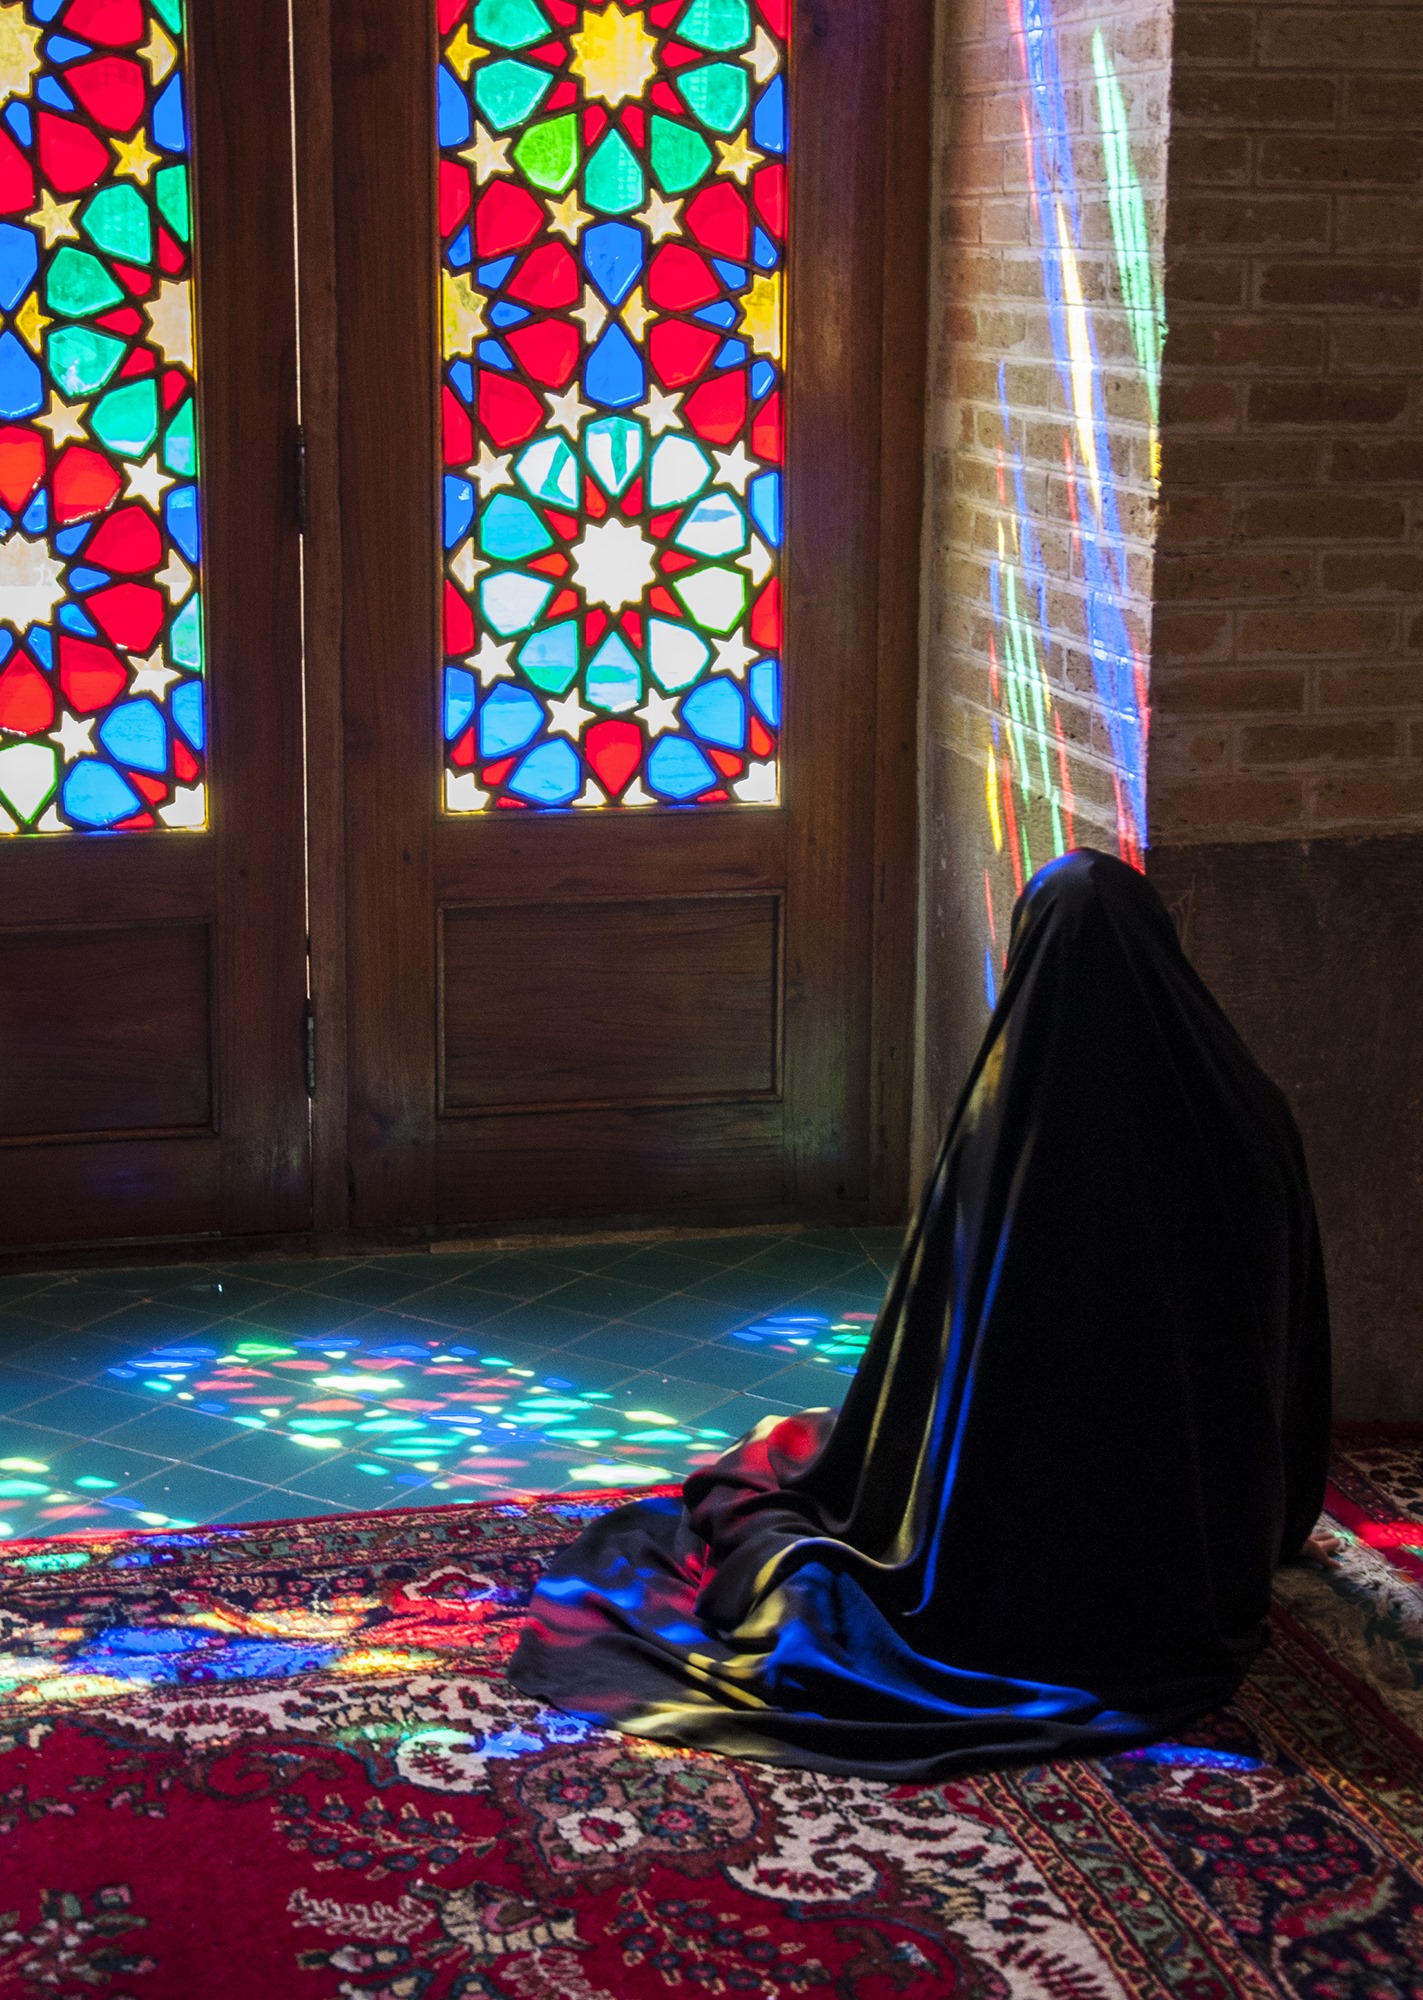 SHIRAZ - Magnificent stained-glass windows conceal the strenght of devotion